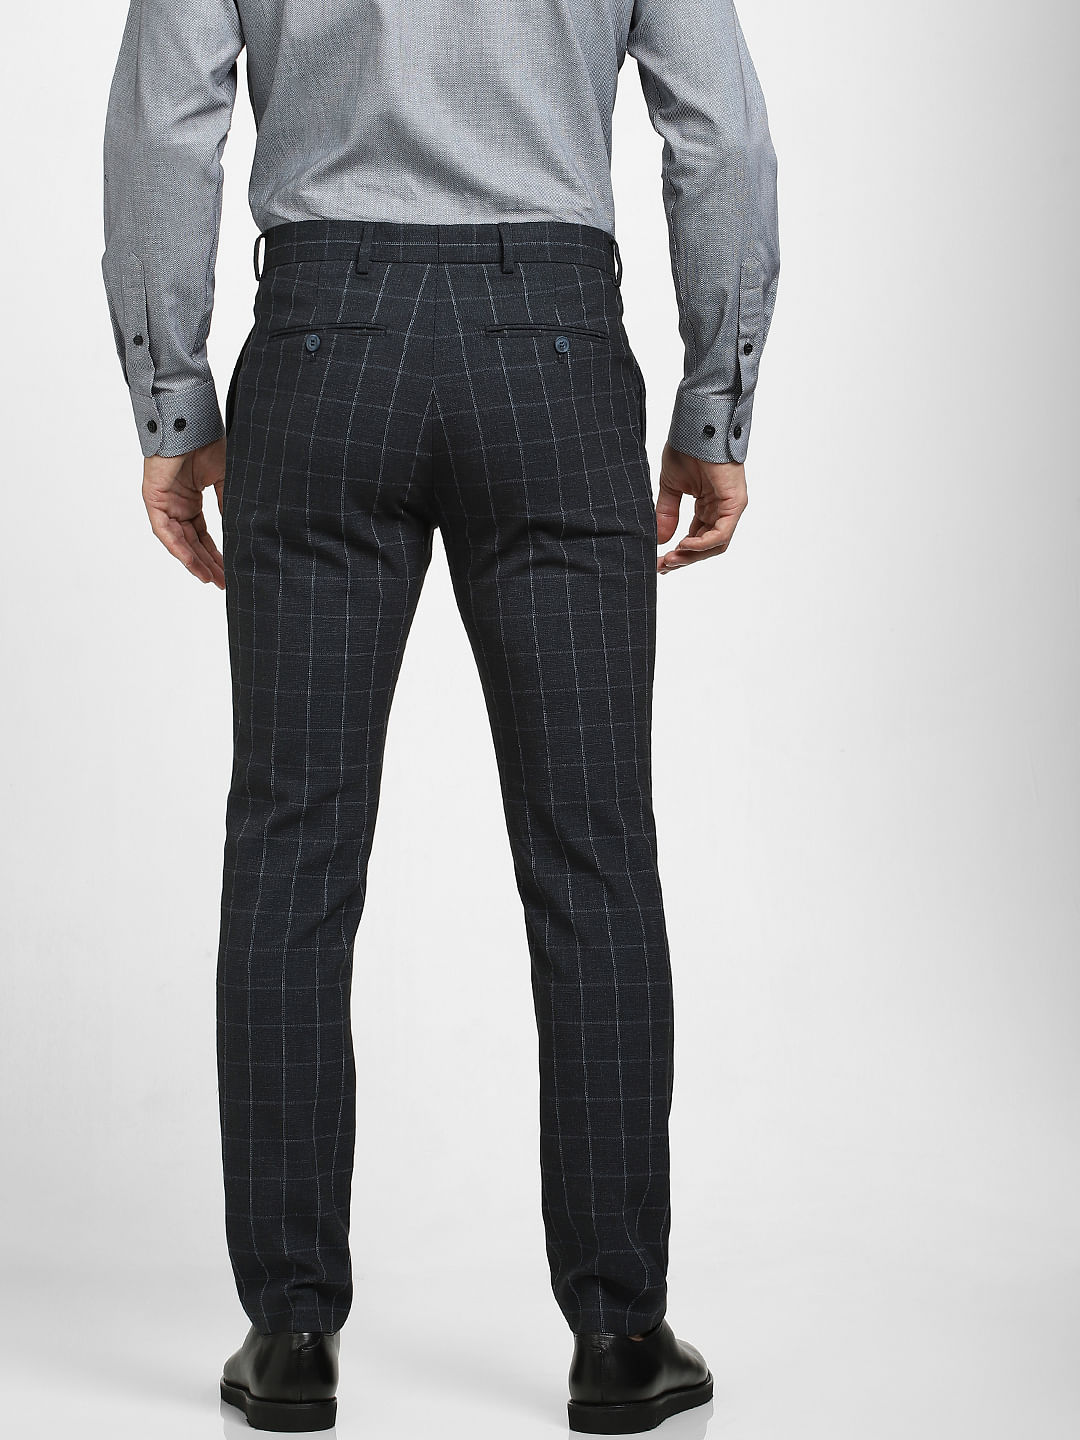 Skinny Fit Checked Pants - Dark blue/checked - Men | H&M US